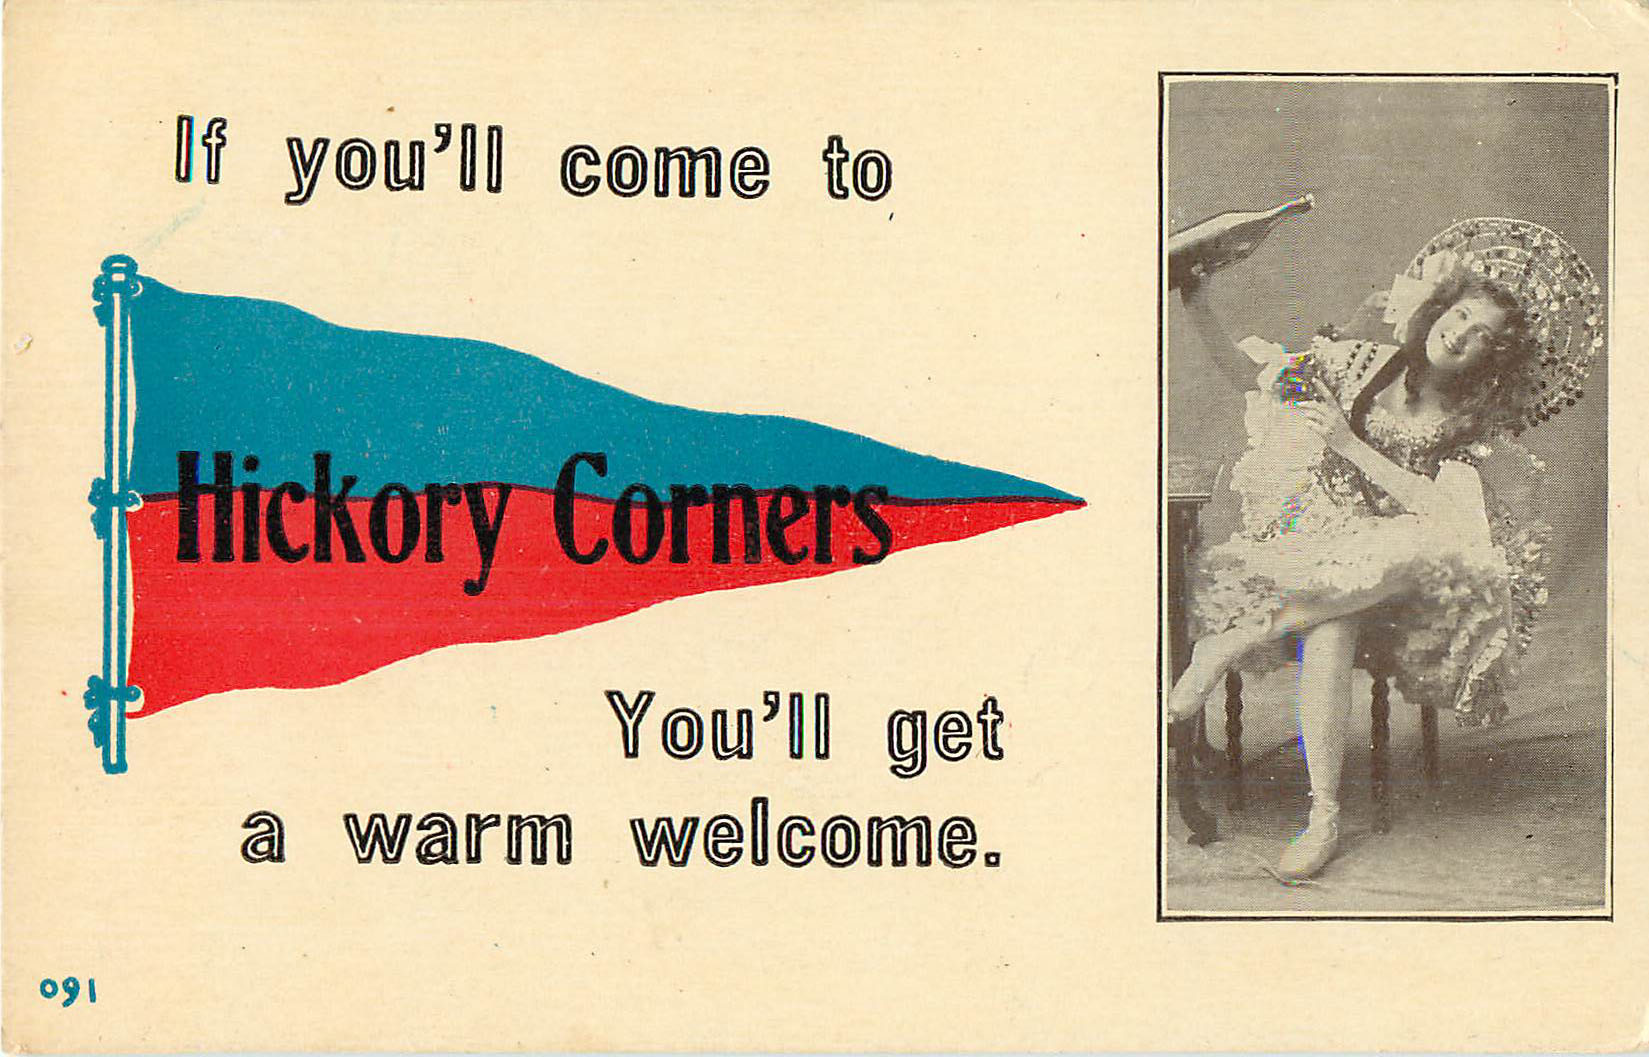 If you'll come to Hickory Corners - Pennant Postcard